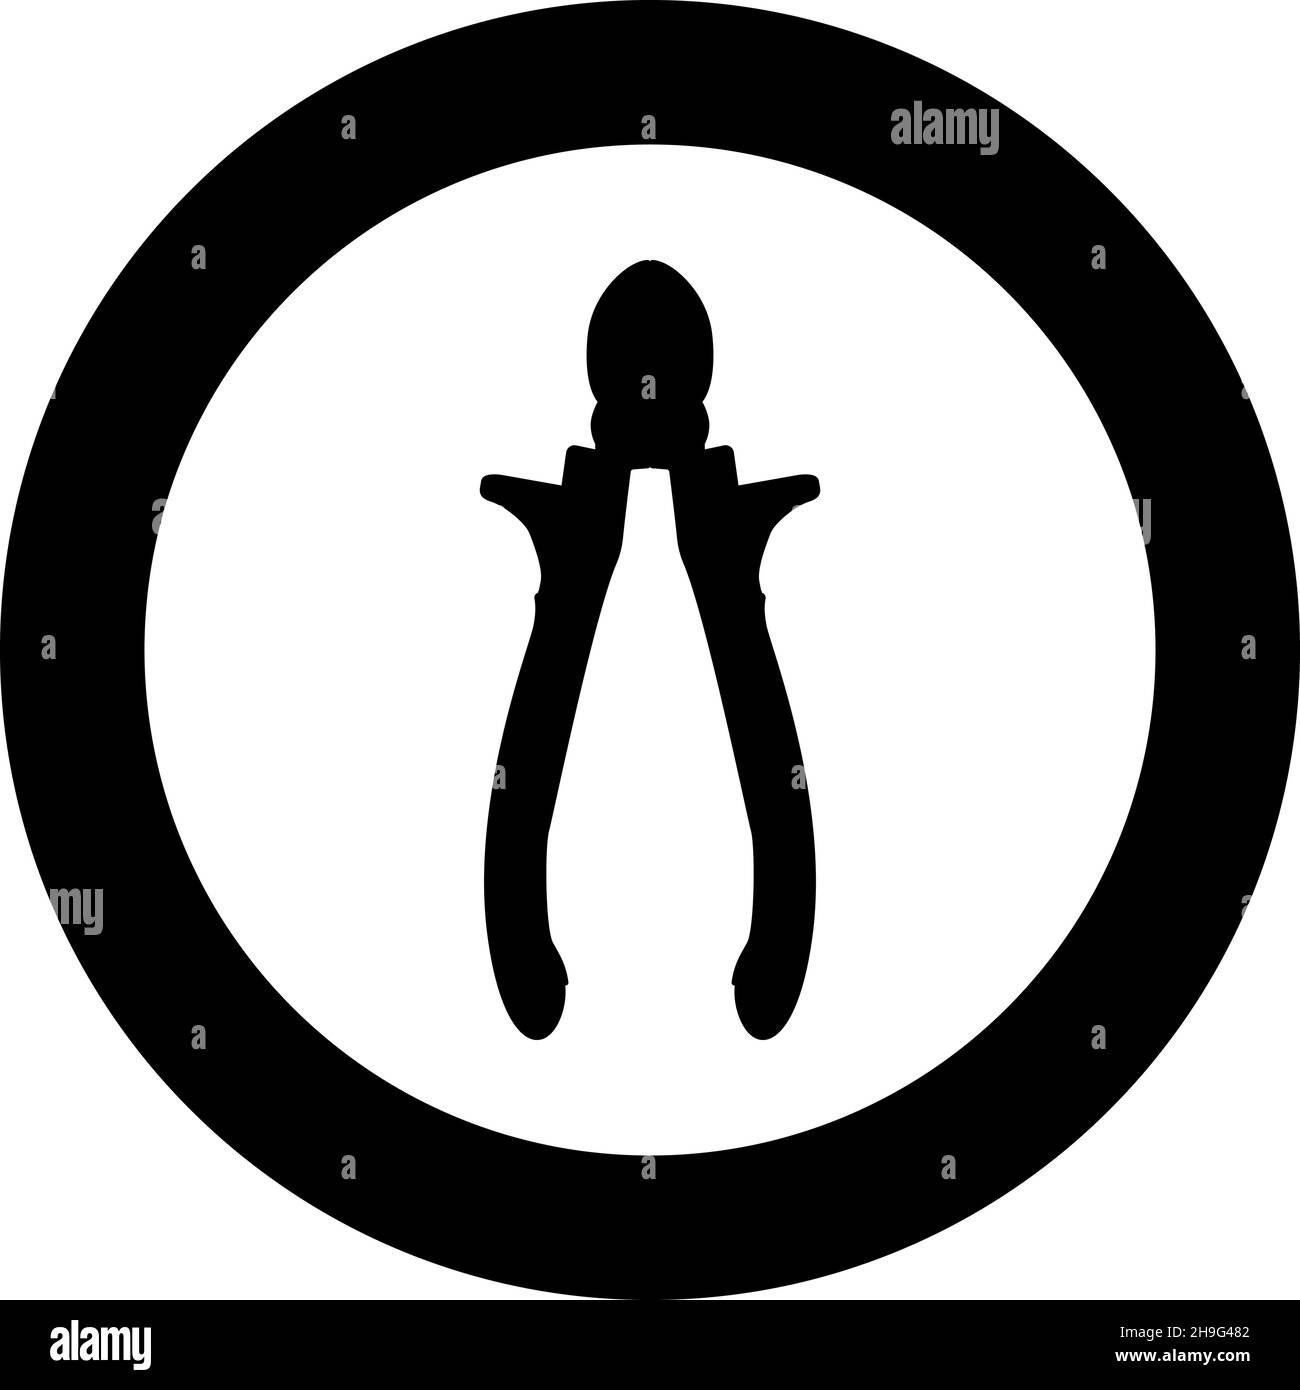 Cutting pliers side cutter hand tools for cutting wires icon in circle round black color vector illustration image solid outline style simple Stock Vector